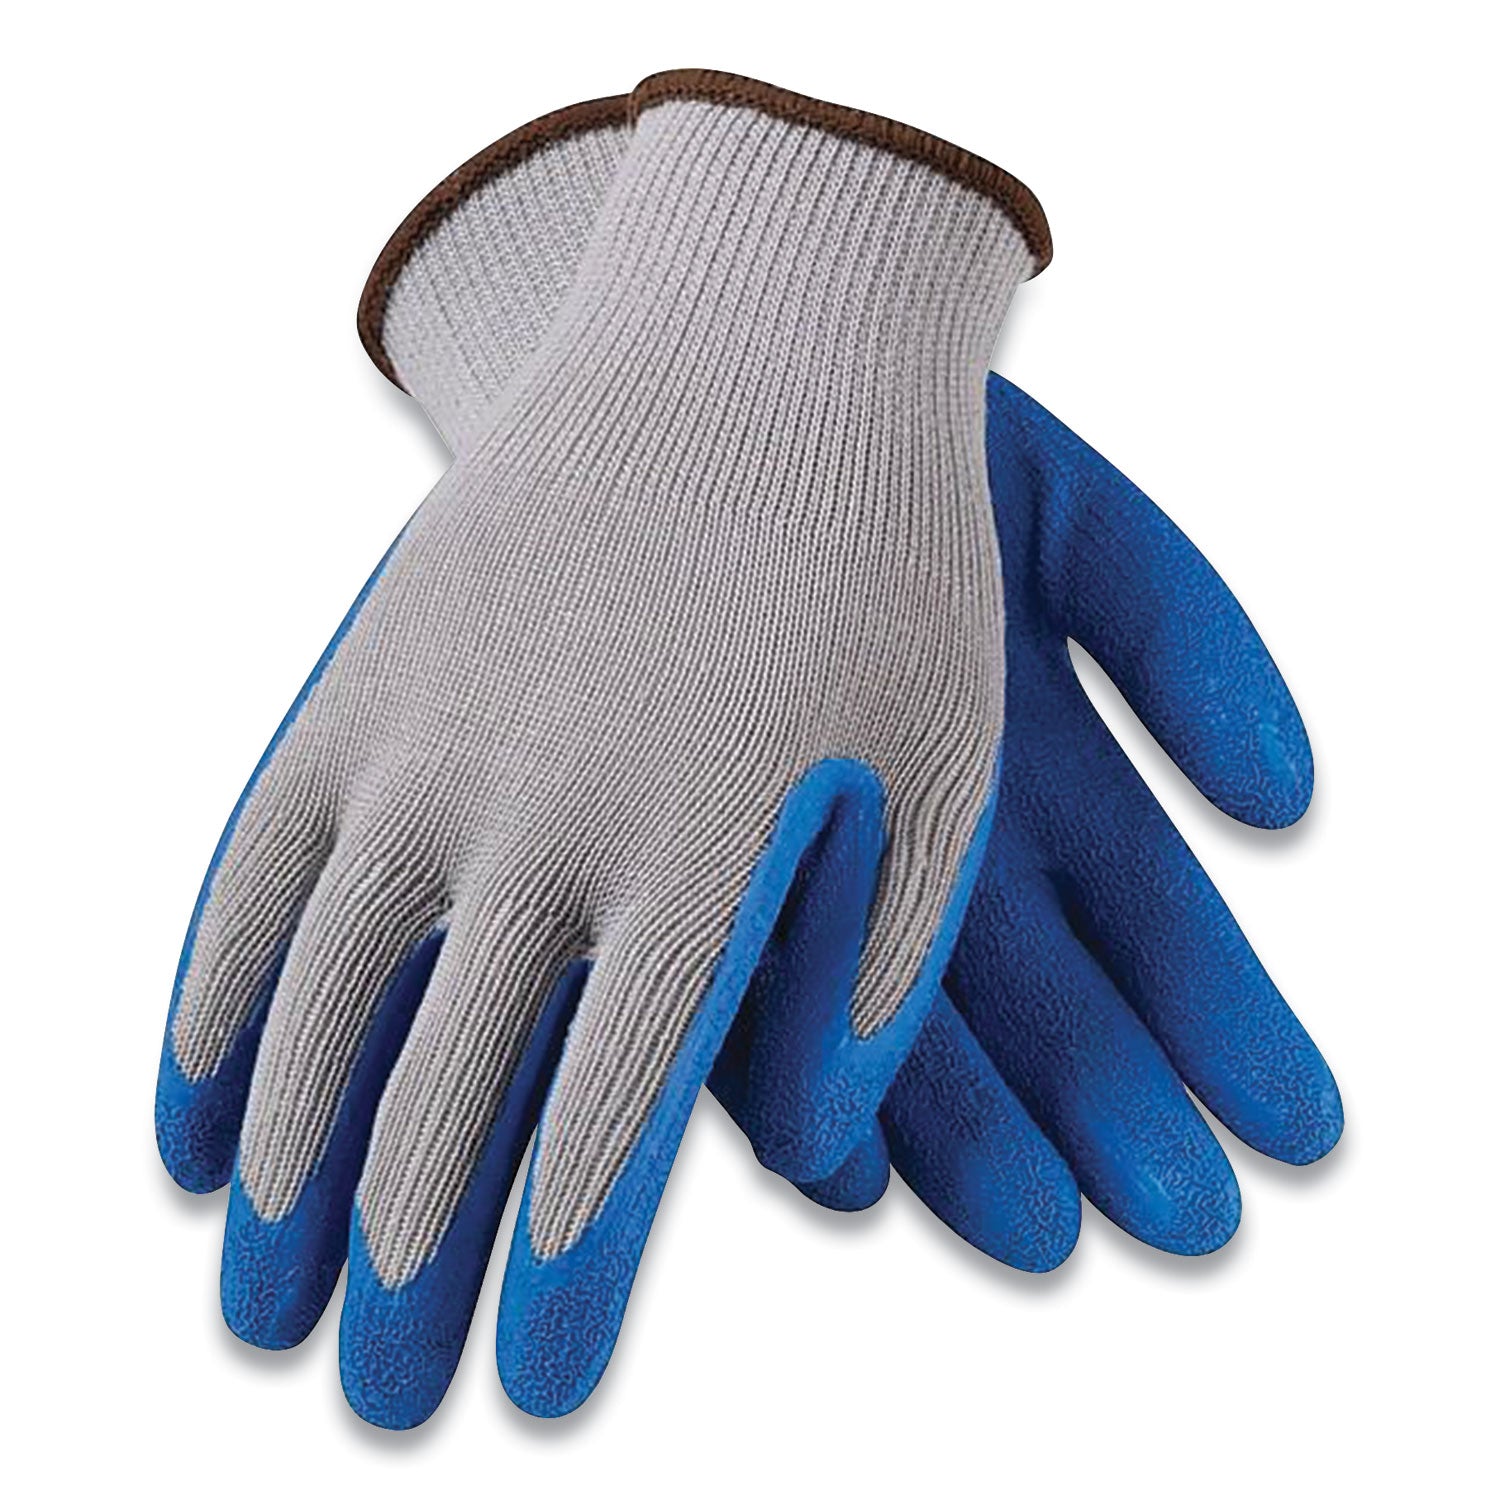 Gp Latex-coated Cotton-polyester Gloves, Medium, Gray-blue, 12 Pairs